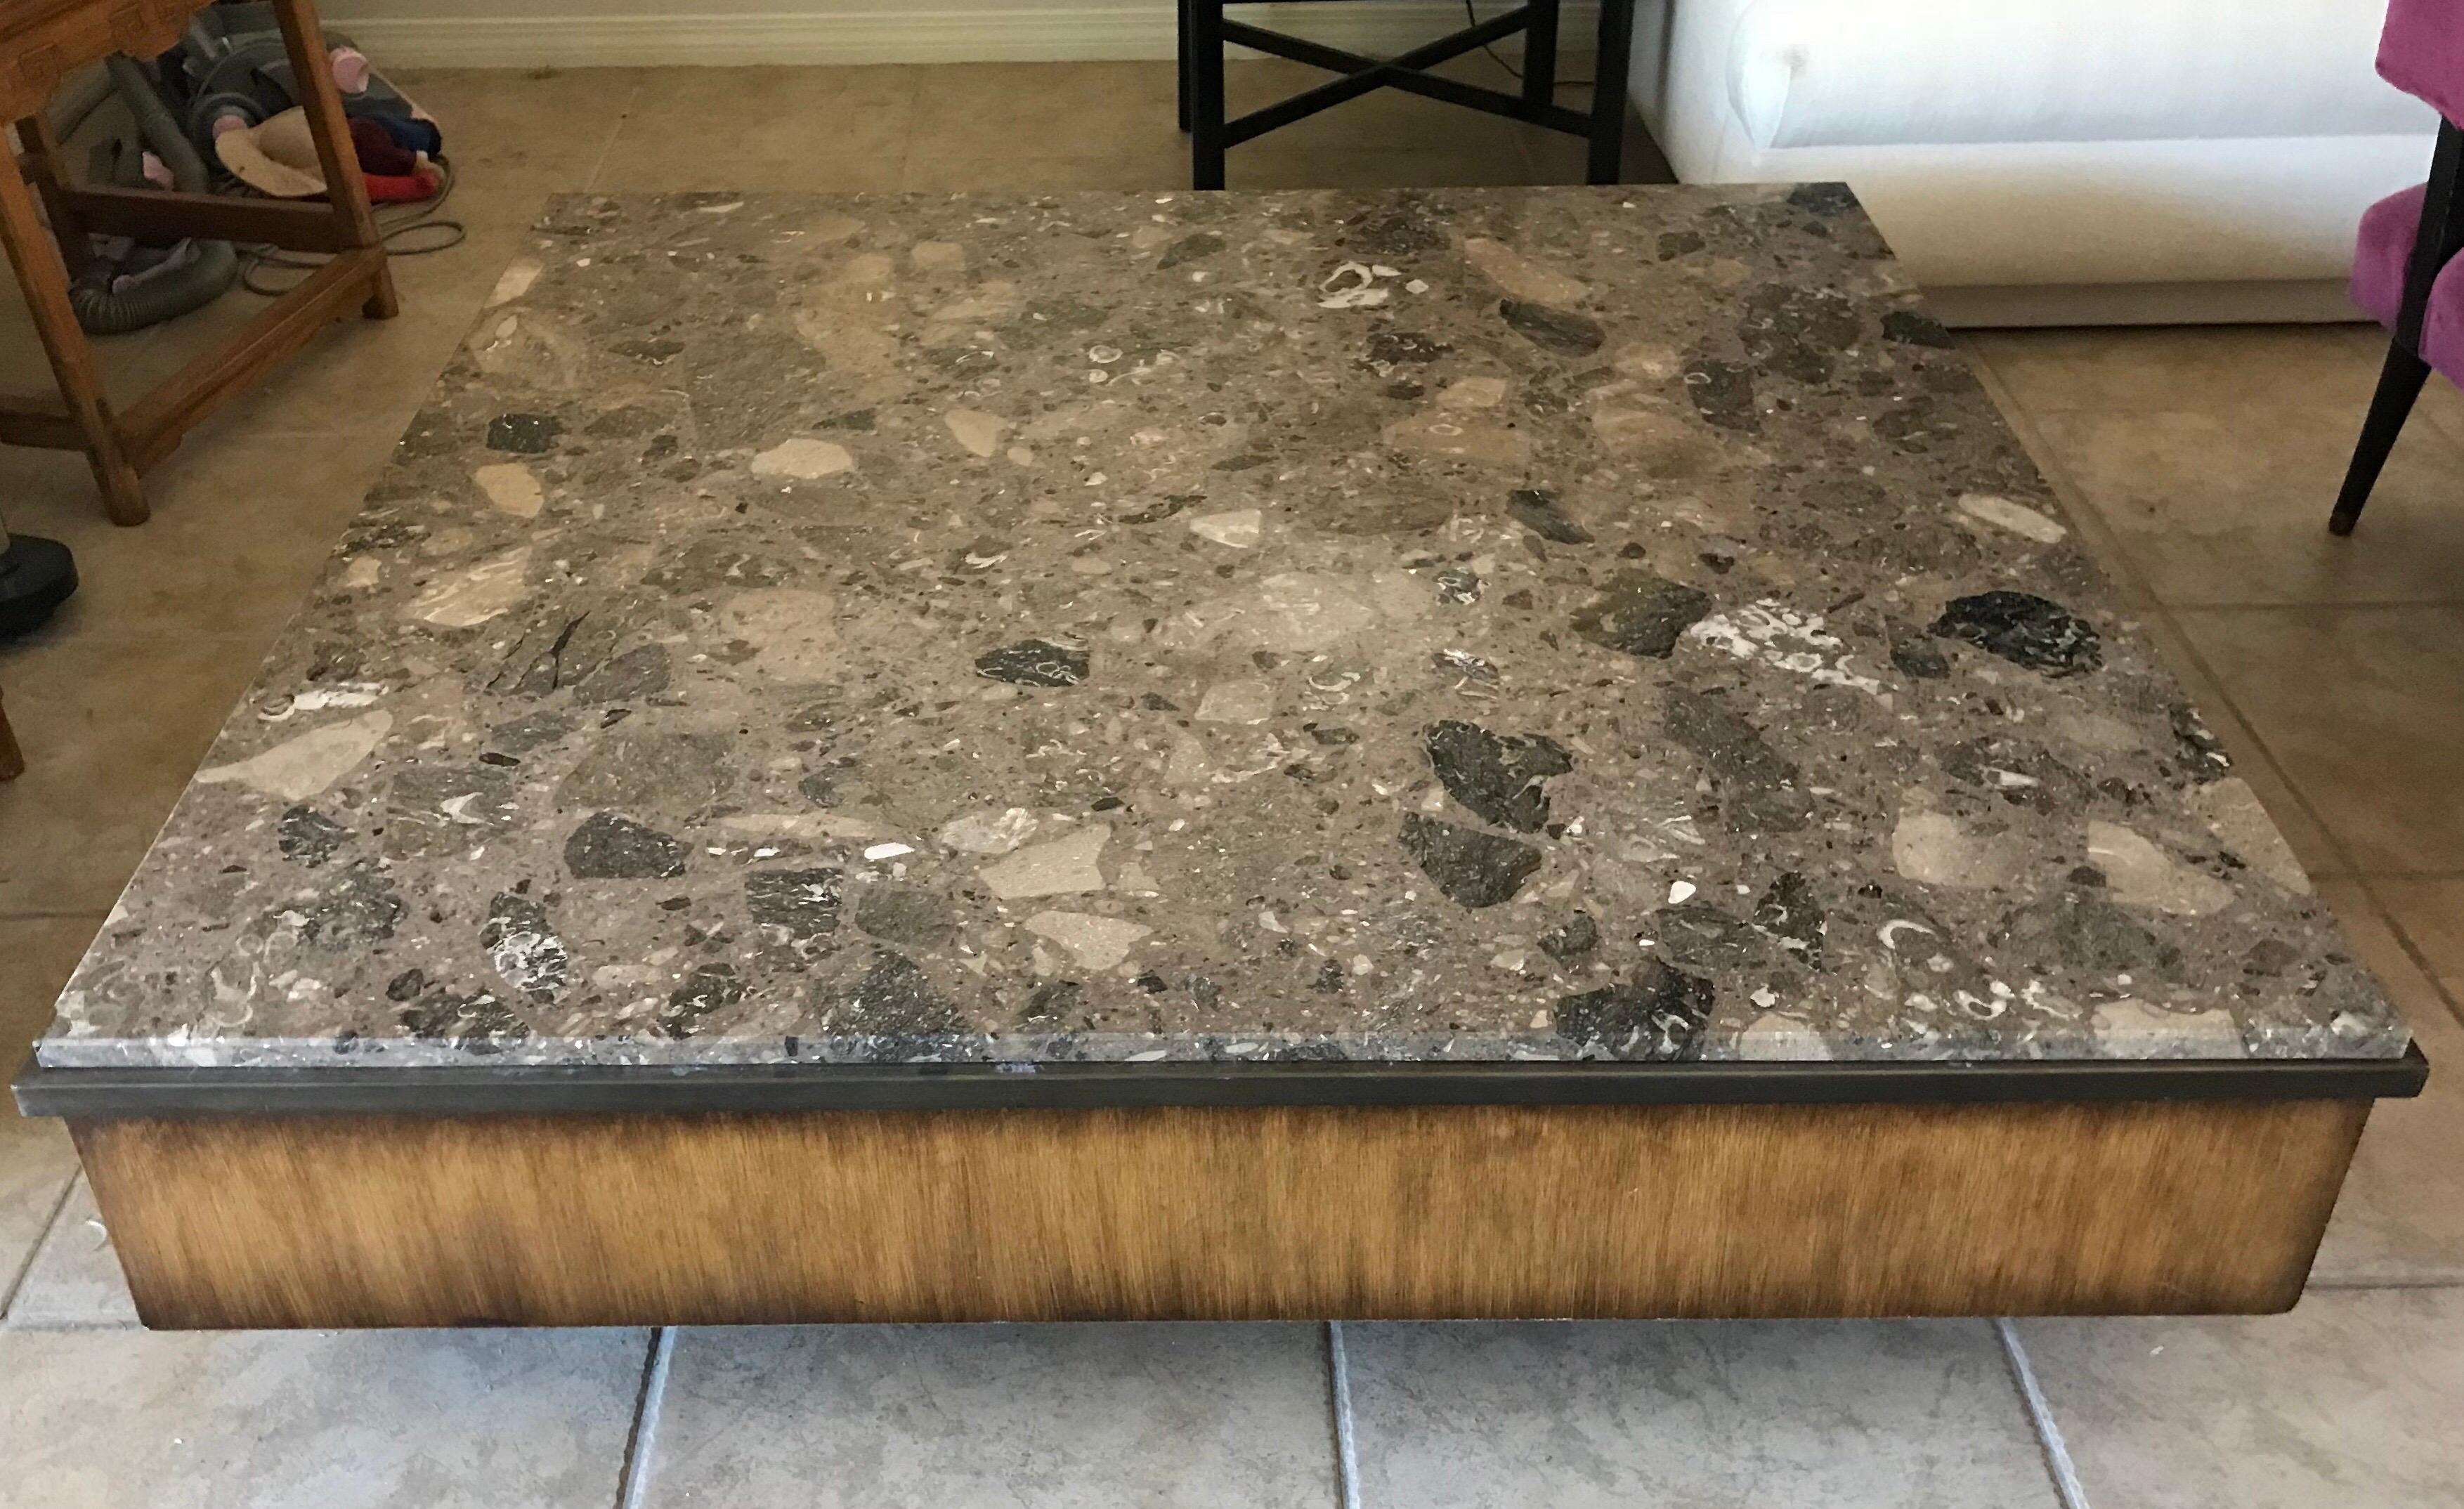 From a stunning Mid-Century Modern Estate (to call it a residence is inadequate) full of A list art and furnishings, is this brown marble, bronze and wood large, square coffee table. The metal trim could be antique brass, but appears to be bronze.